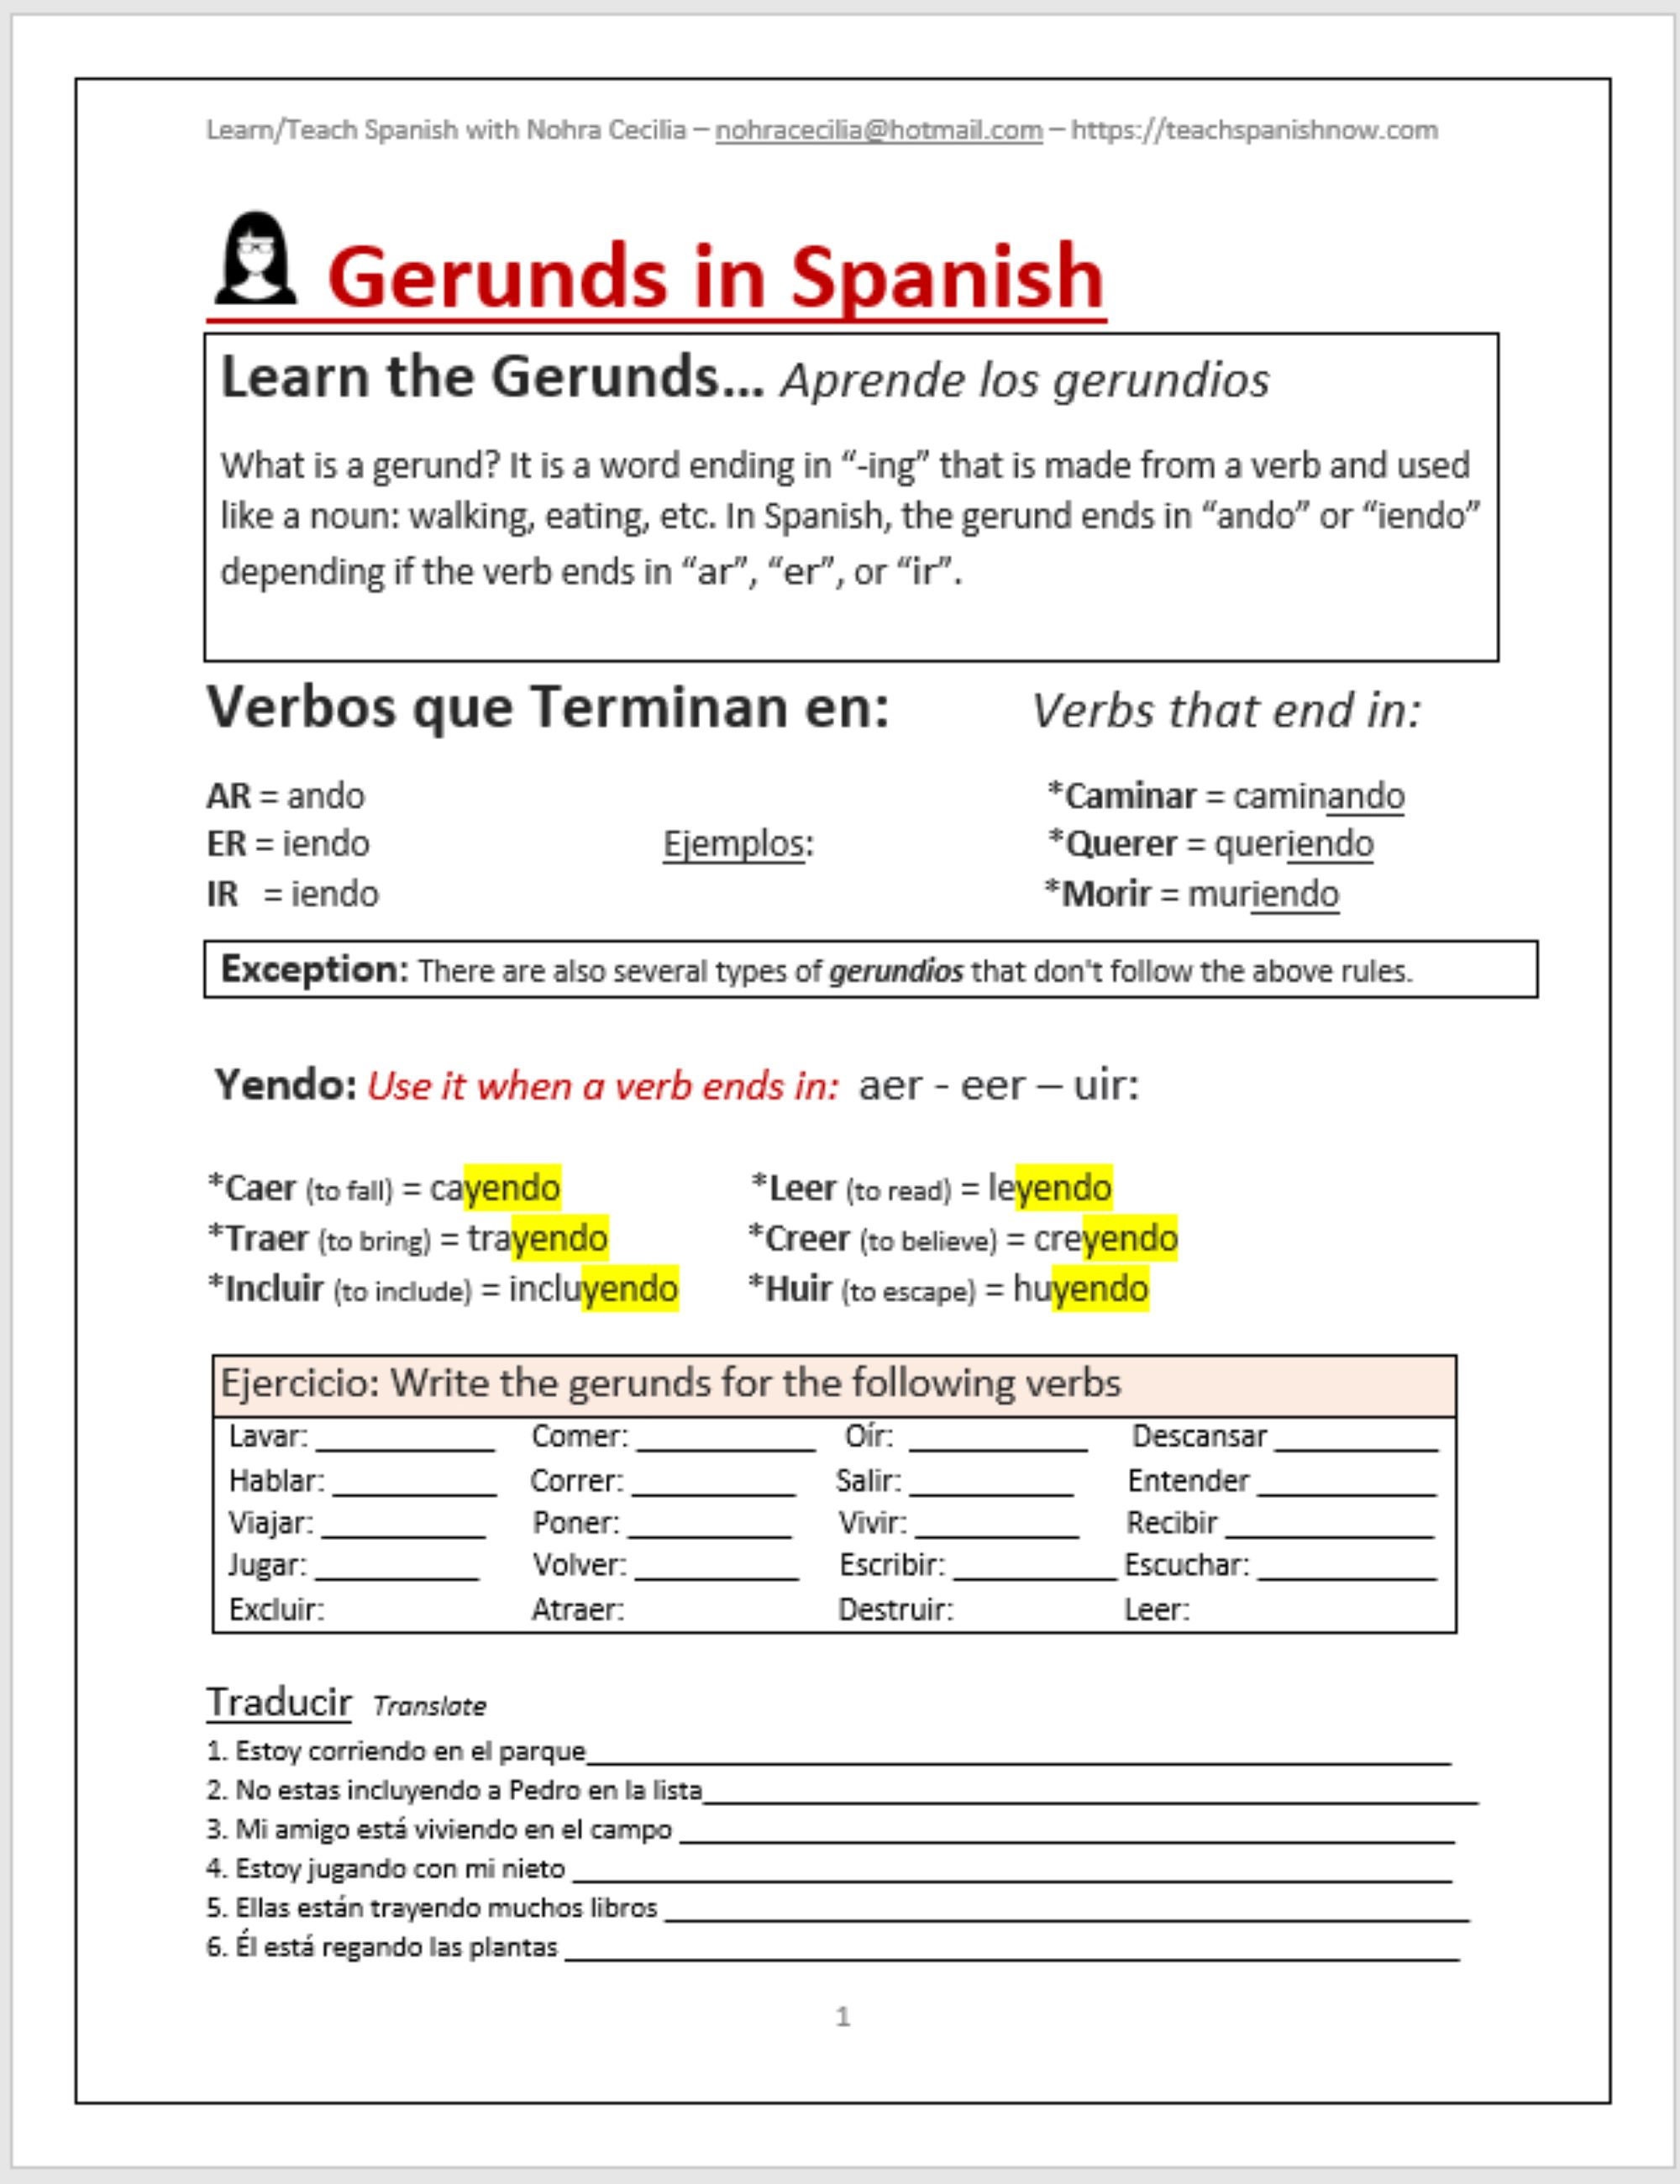 gerunds-in-spanish-lesson-and-test-etsy